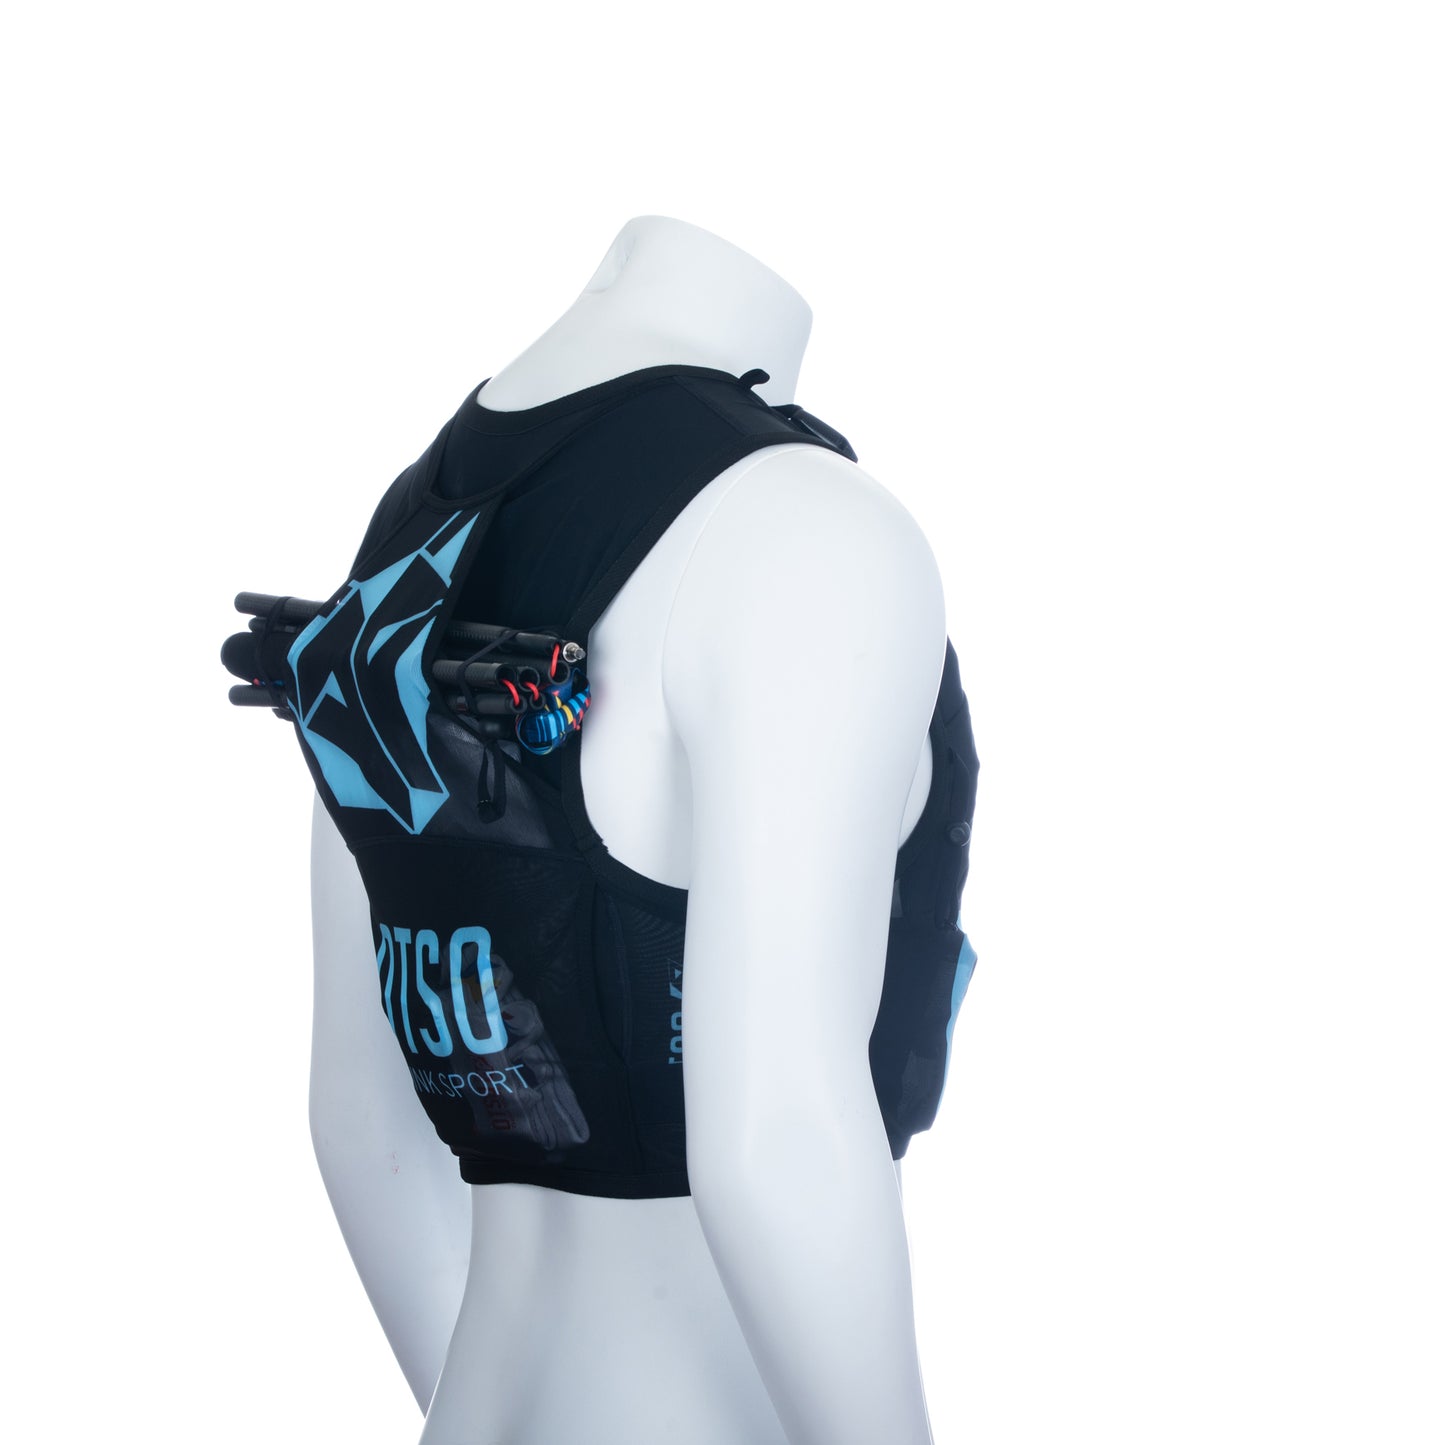 Trail running backpack - Black & Turquoise